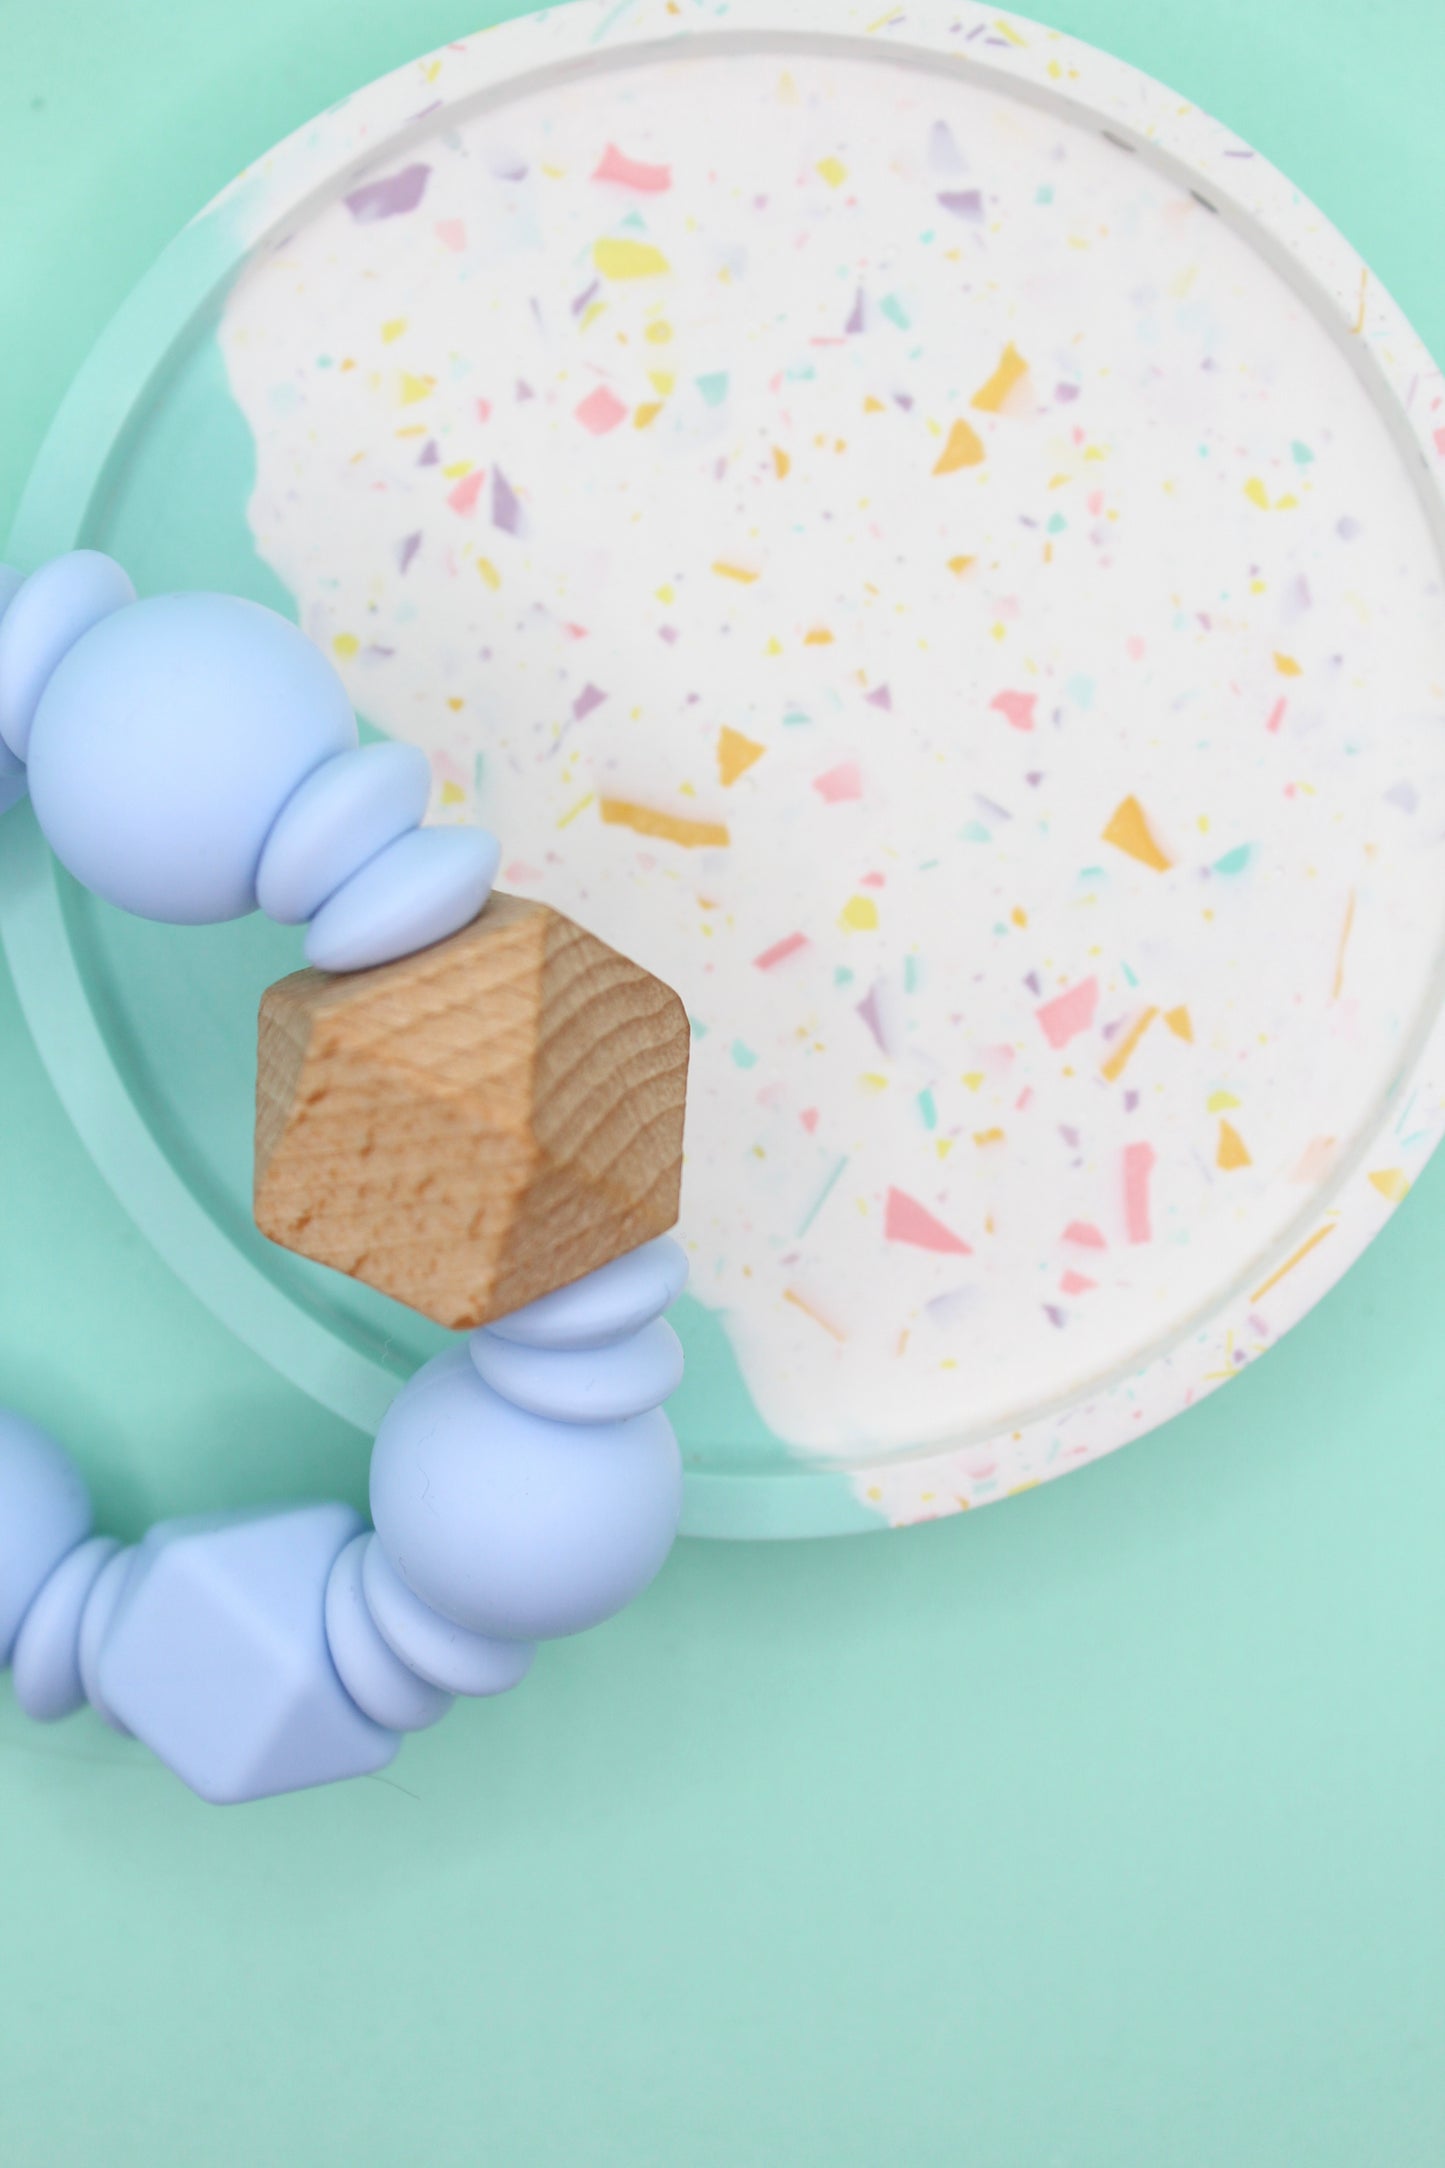 Silicone and Natural Wood Teether Ring in Lint, Pastel Blue, Peachy and Sienna